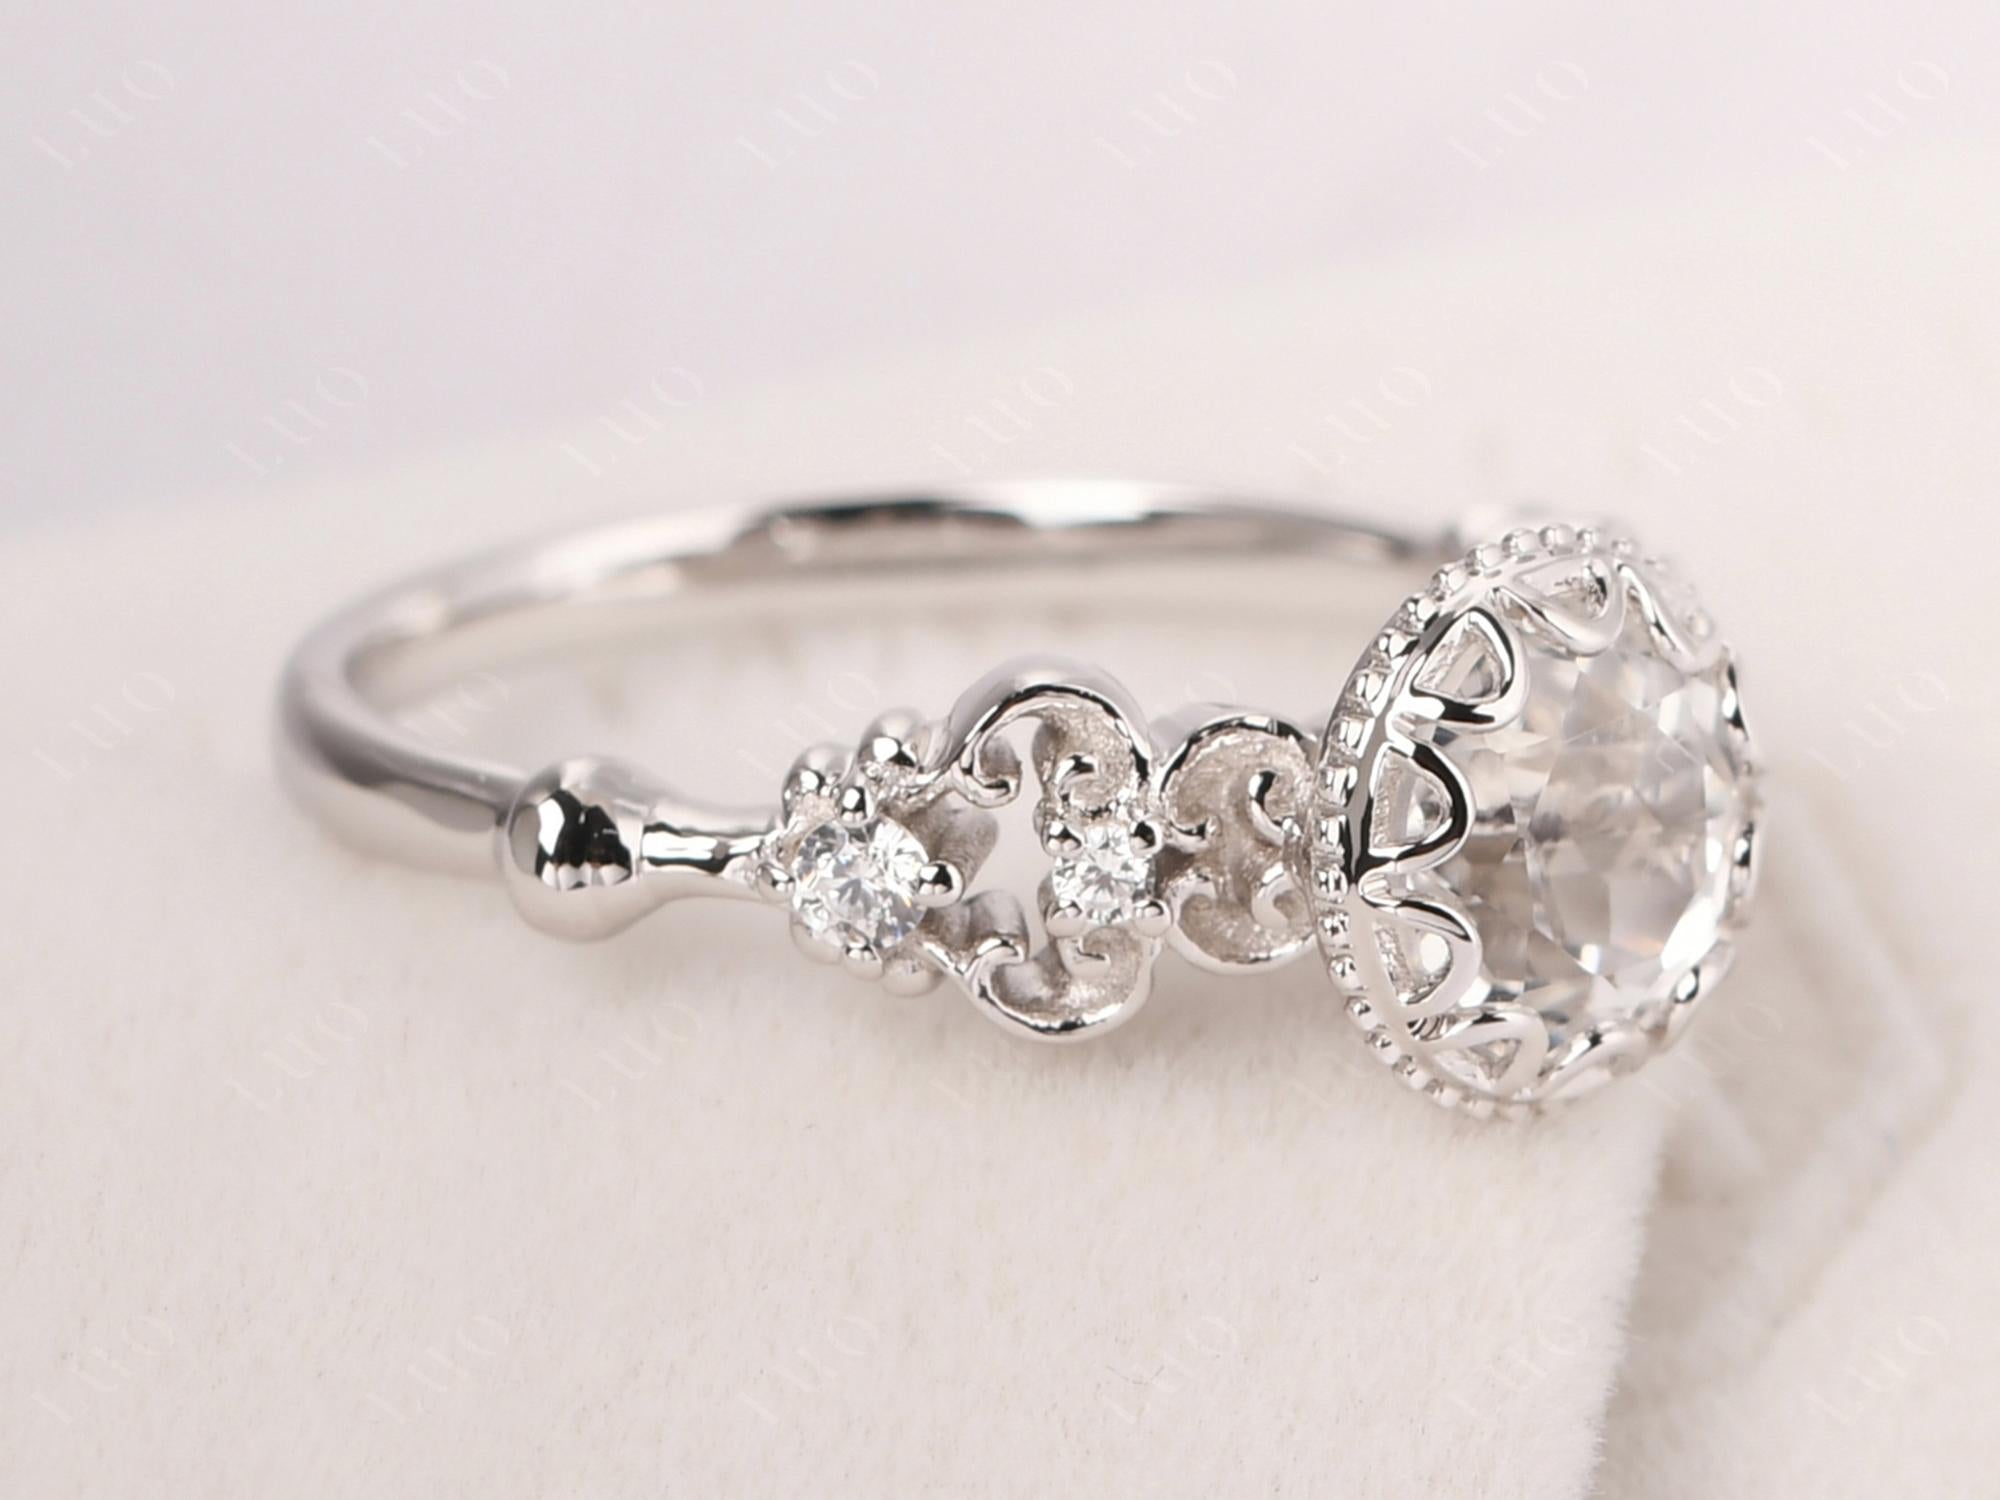 Art Deco Vintage Inspired White Topaz Ring - LUO Jewelry